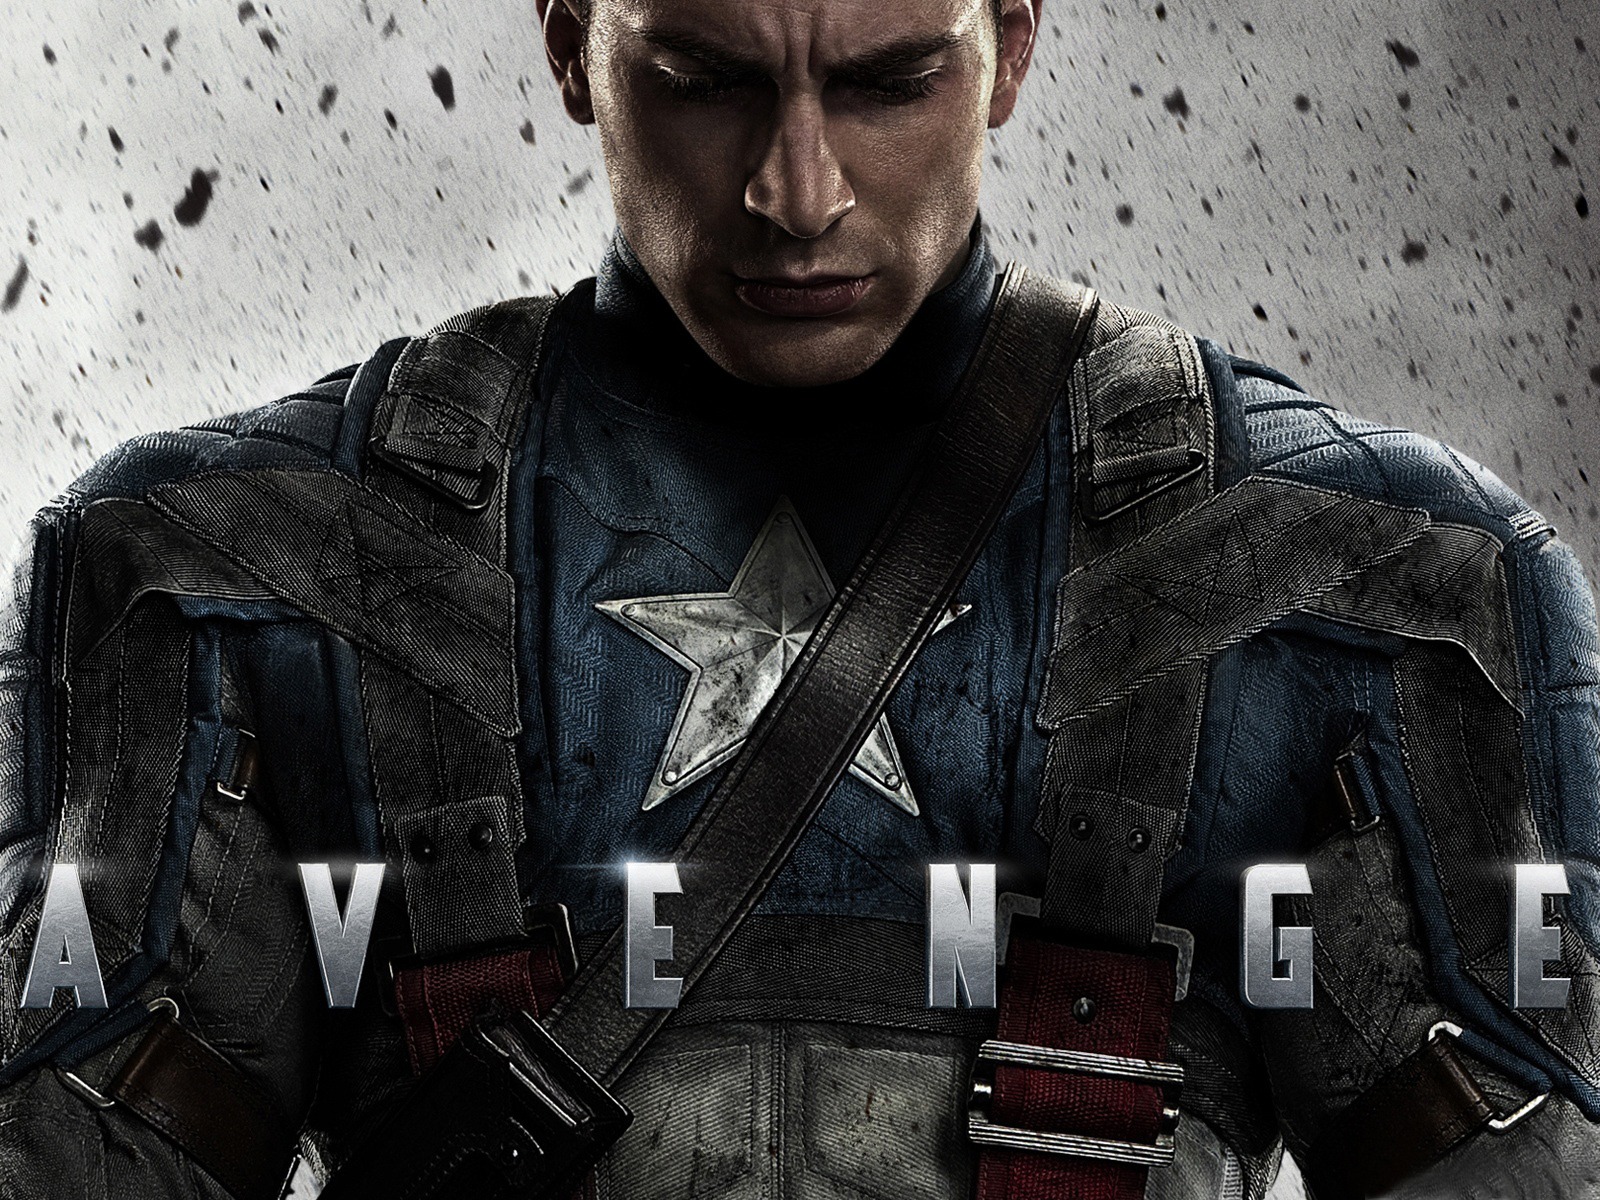 Captain America: The First Avenger wallpapers HD #14 - 1600x1200